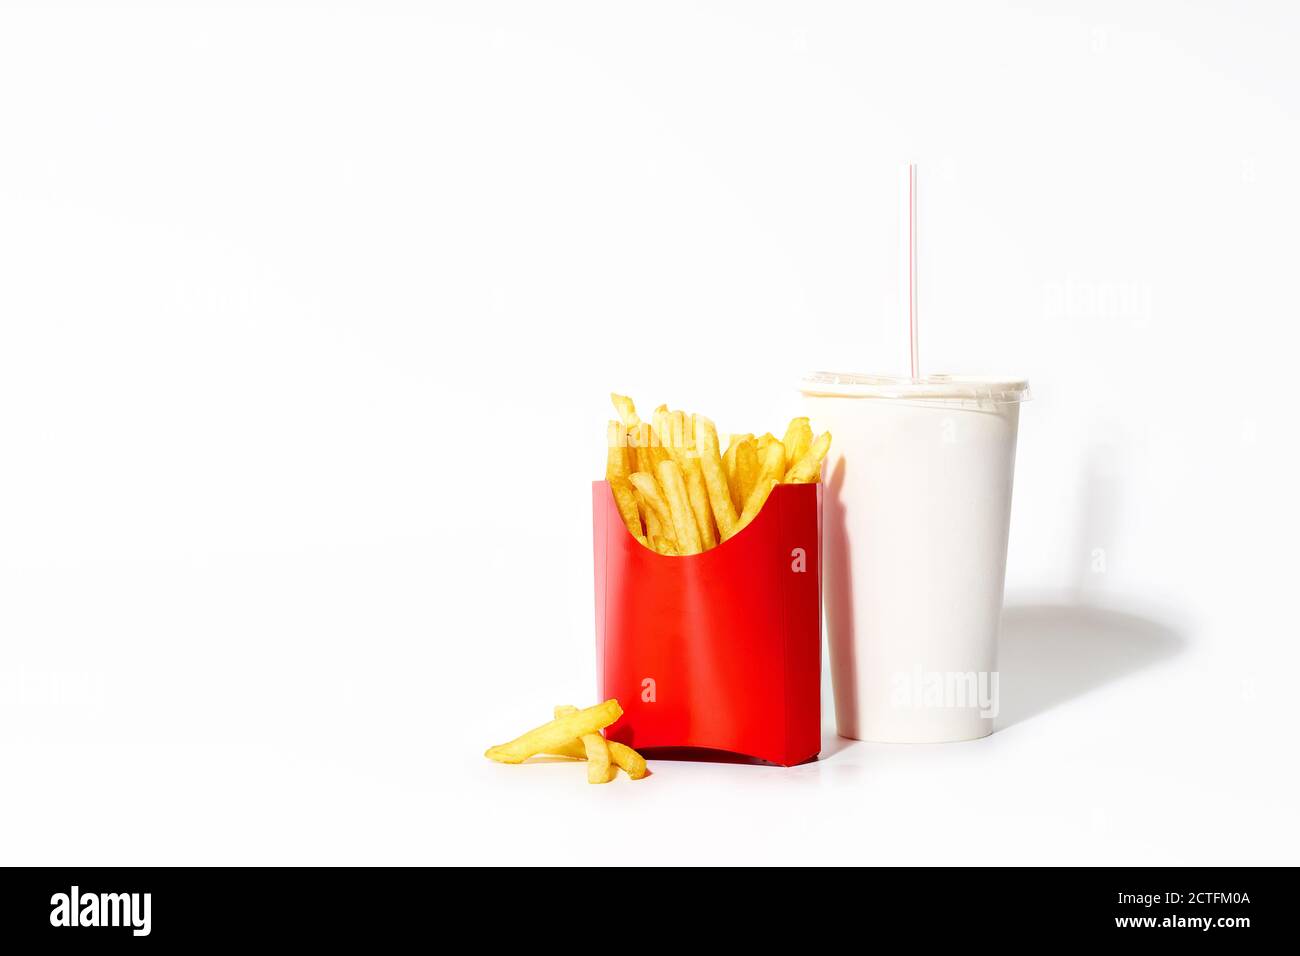 Fried potatoes isolated on white background with a drink in a plastic cup. French fries with copy space. Junk food Stock Photo